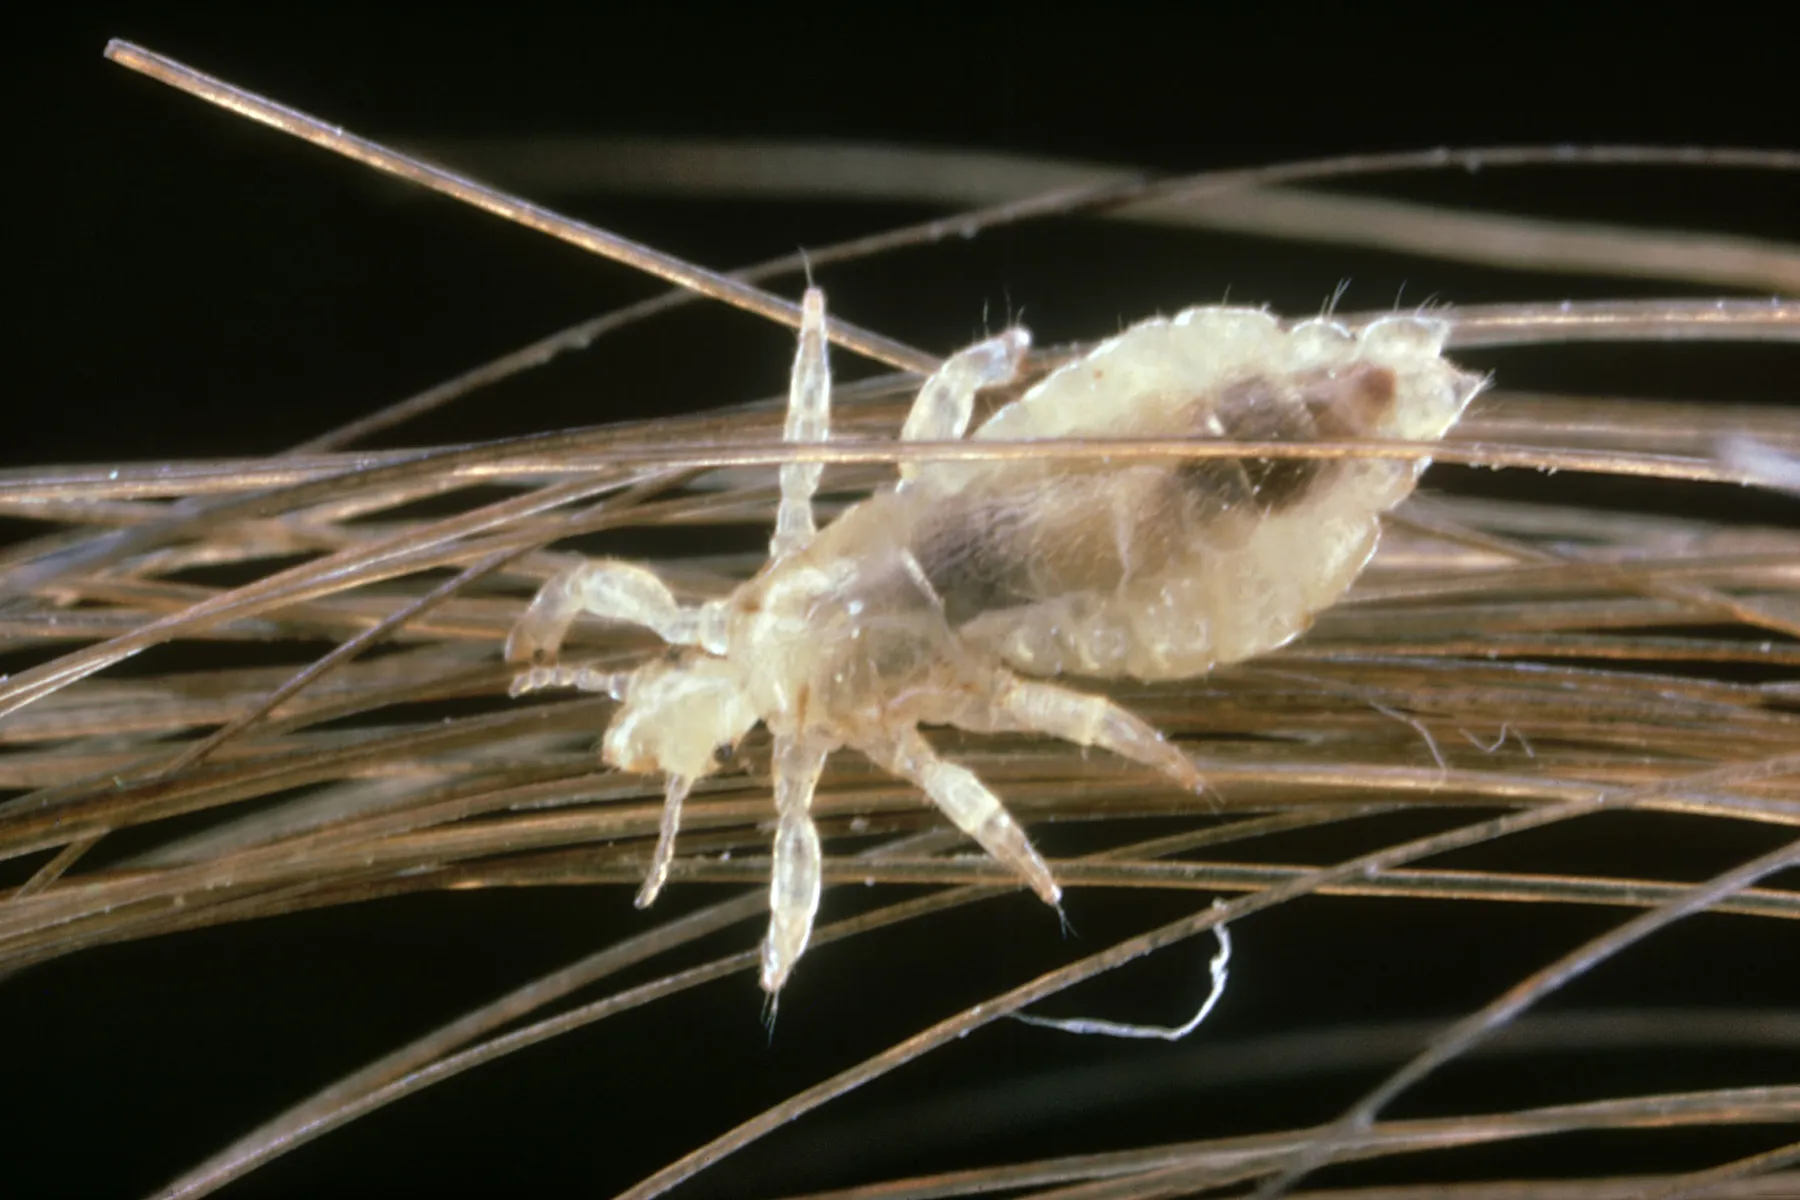 Lice: Pictures of What Head Lice Look Like